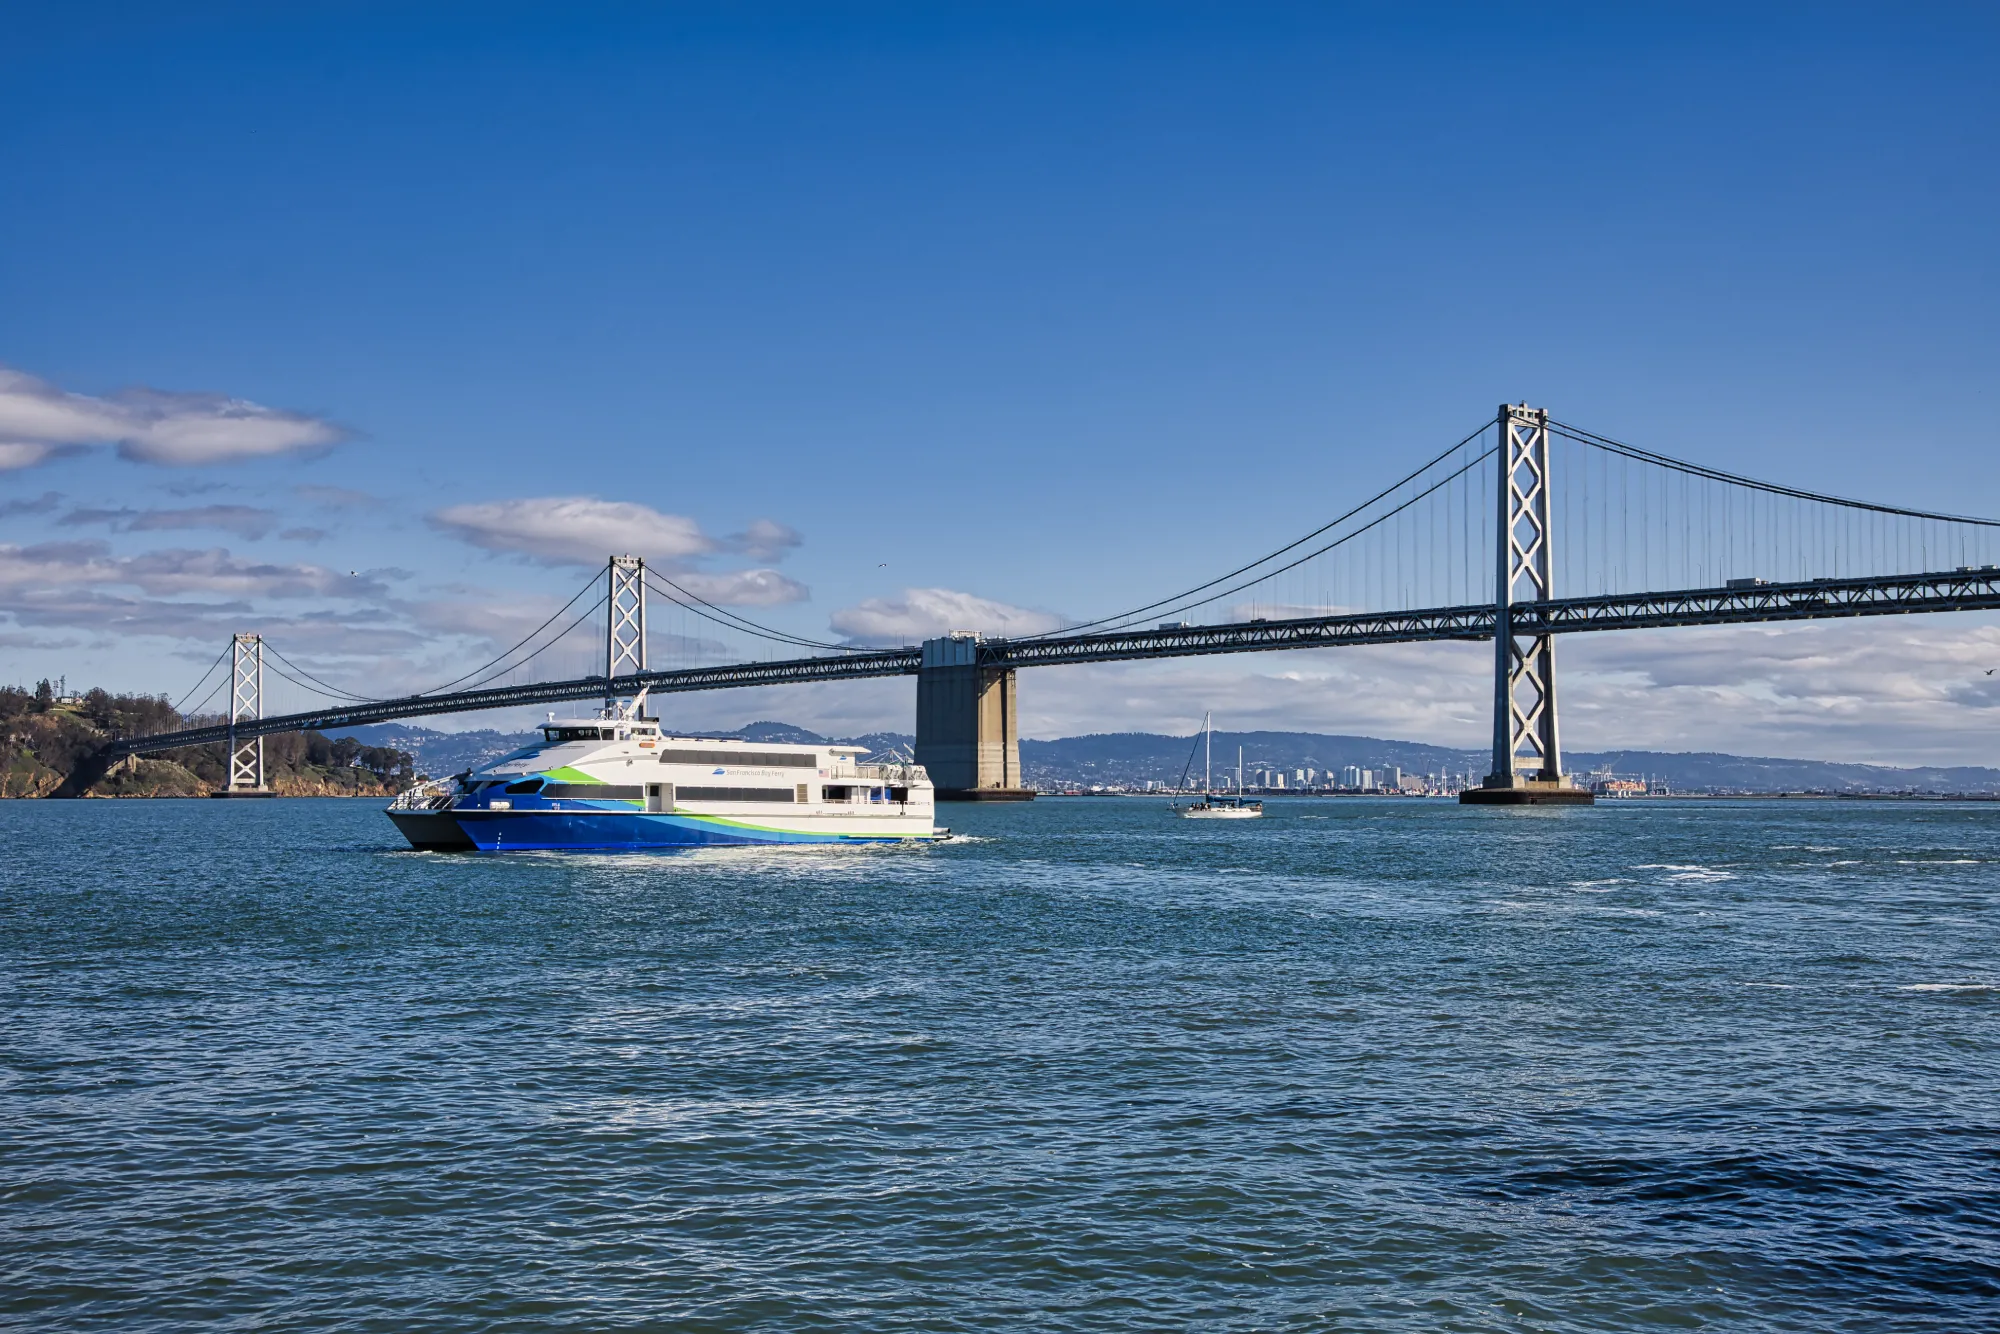 The MV Vela, a ferry vessel operated by San Francisco Bay Ferry, sails across the San Francisco Bay on a sunny, clear day. The Bay Bridge is in the background.